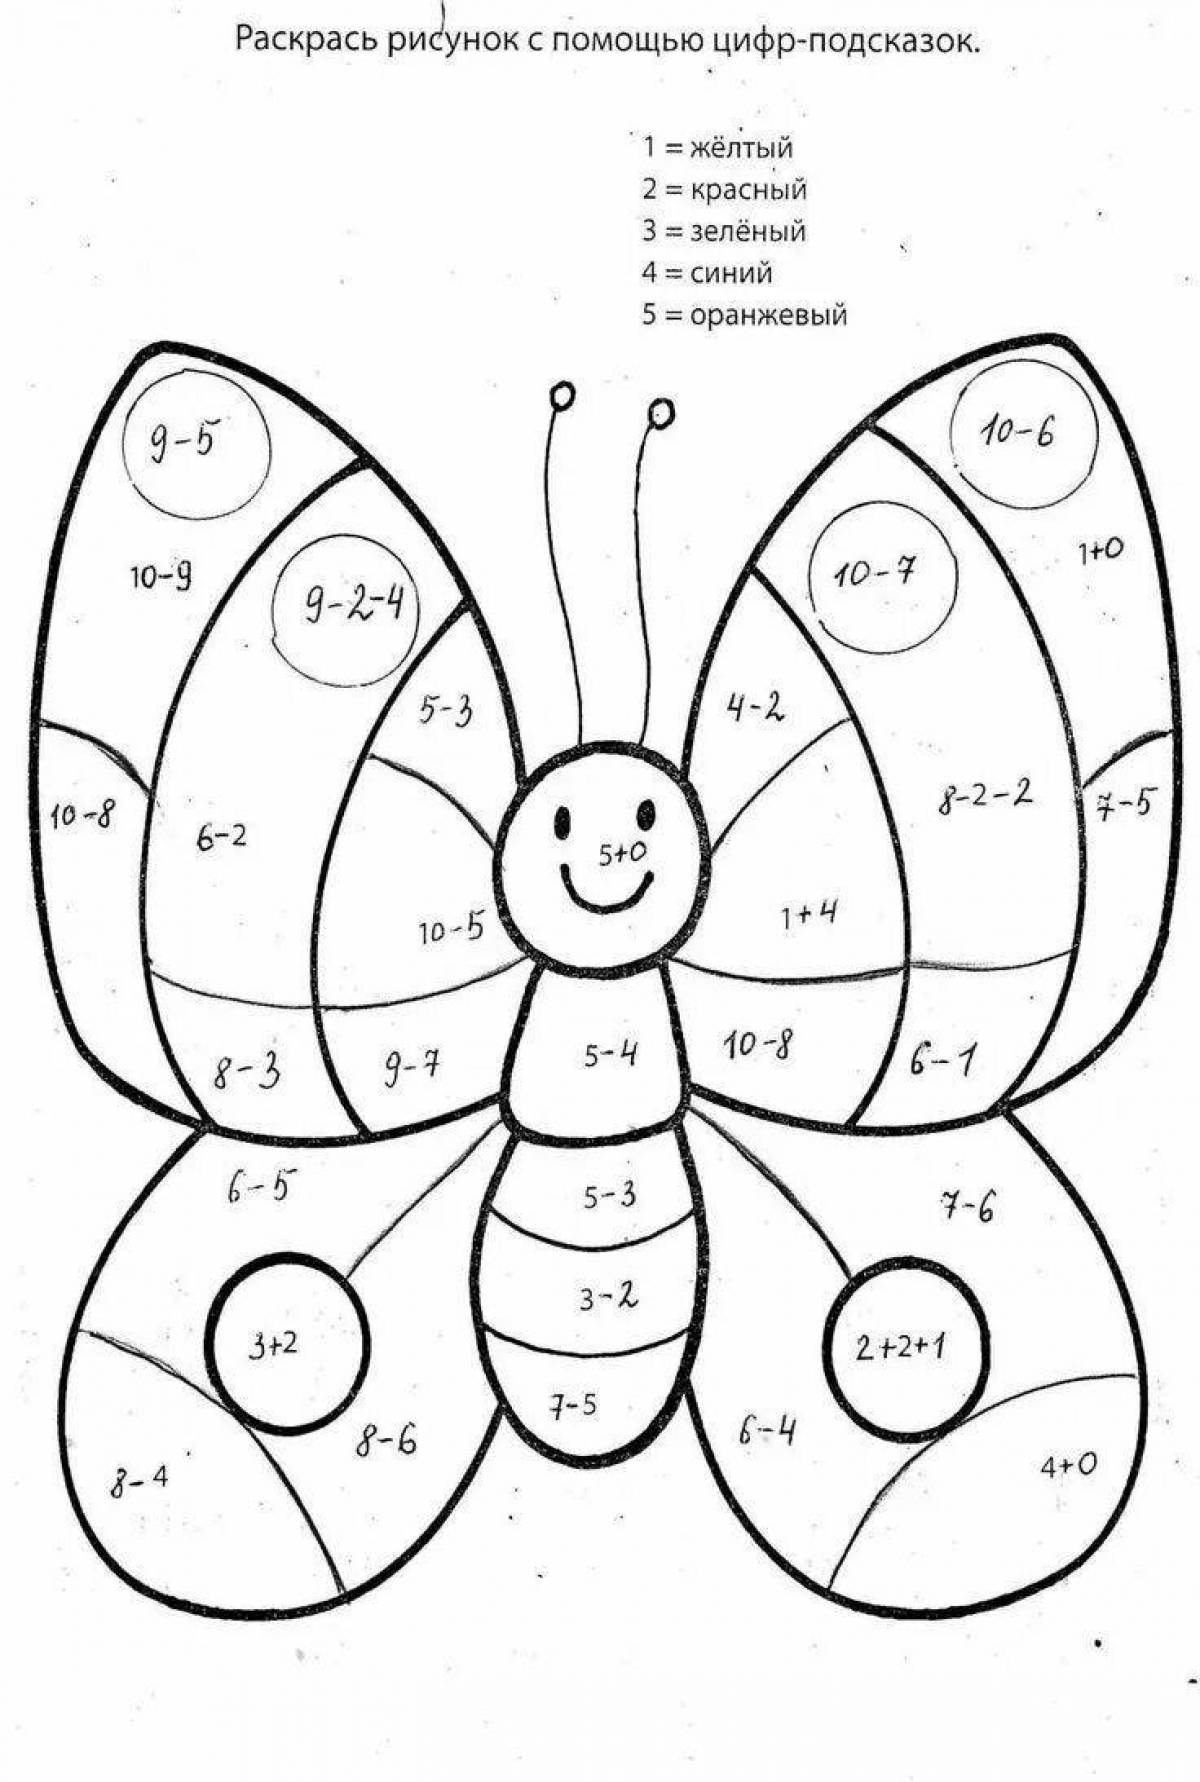 Vibrant math coloring book for kids 6-7 years old